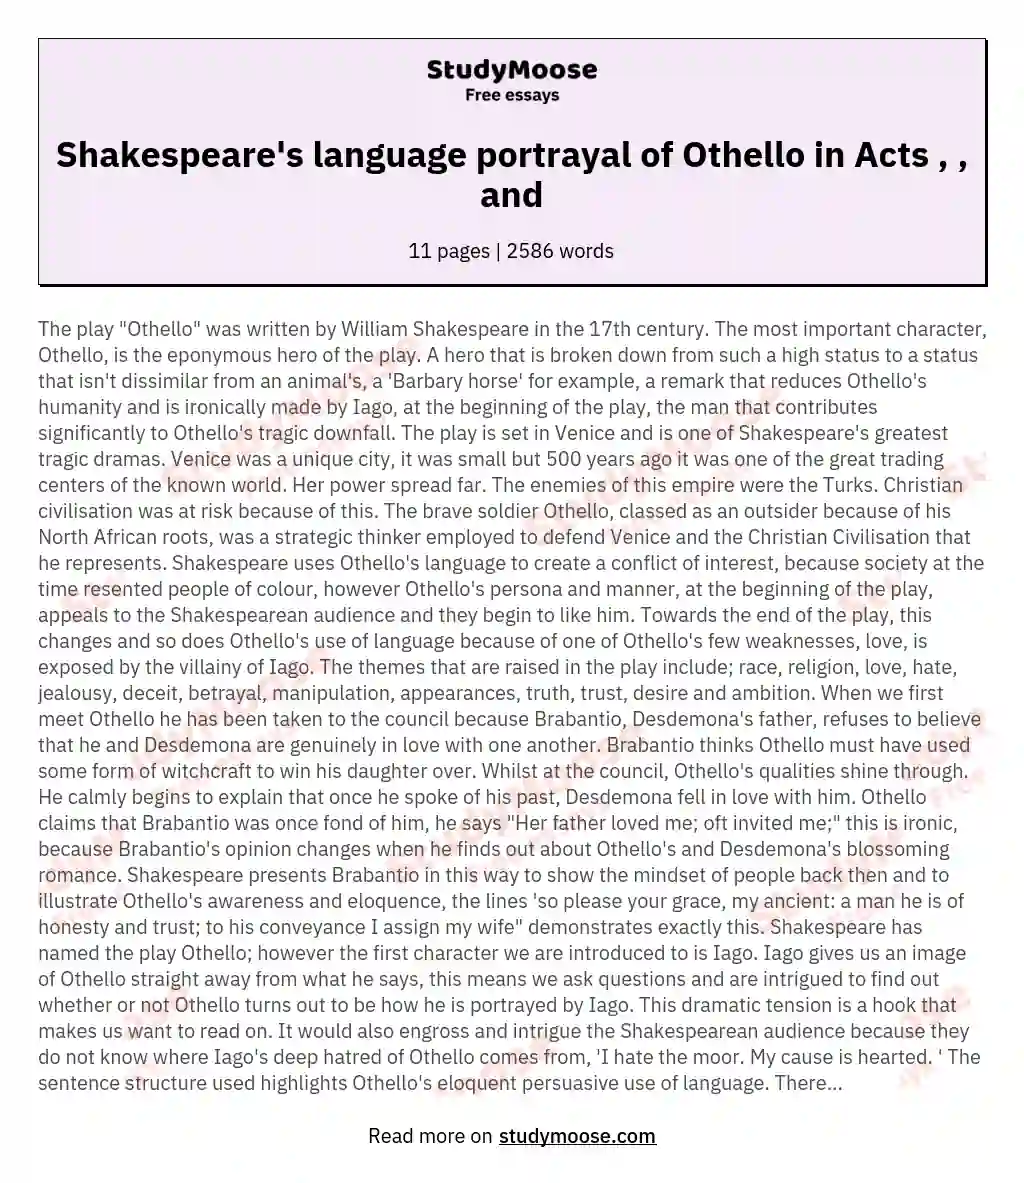 Discuss and evaluate how Shakespeare uses language to present the character of Othello in Act 1 Scene 3, Act 3 Scene 3 and Act 4 scene 1